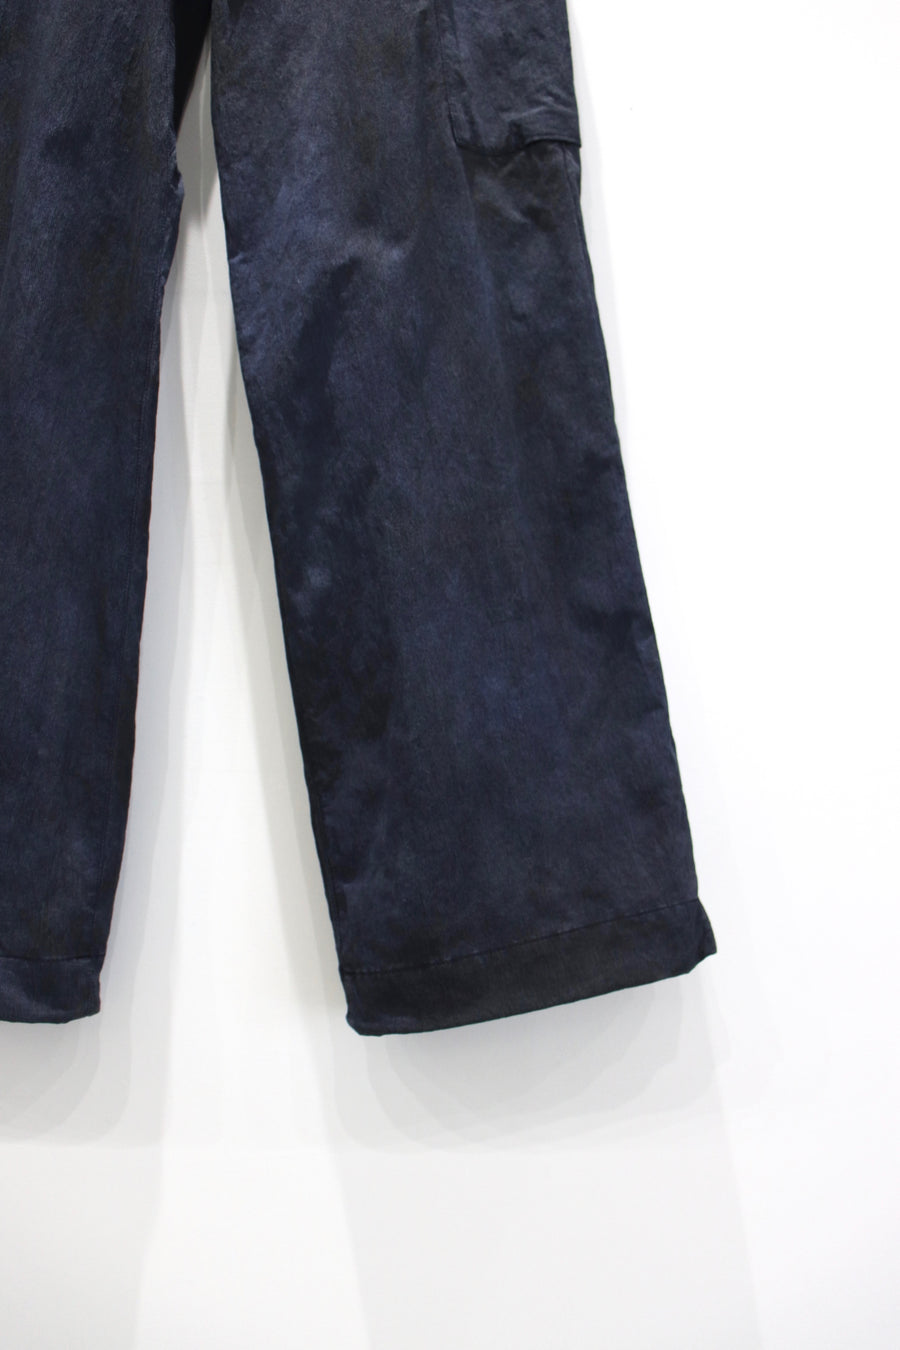 NULABEL  GARMENT DYED FIELD TROUSERS